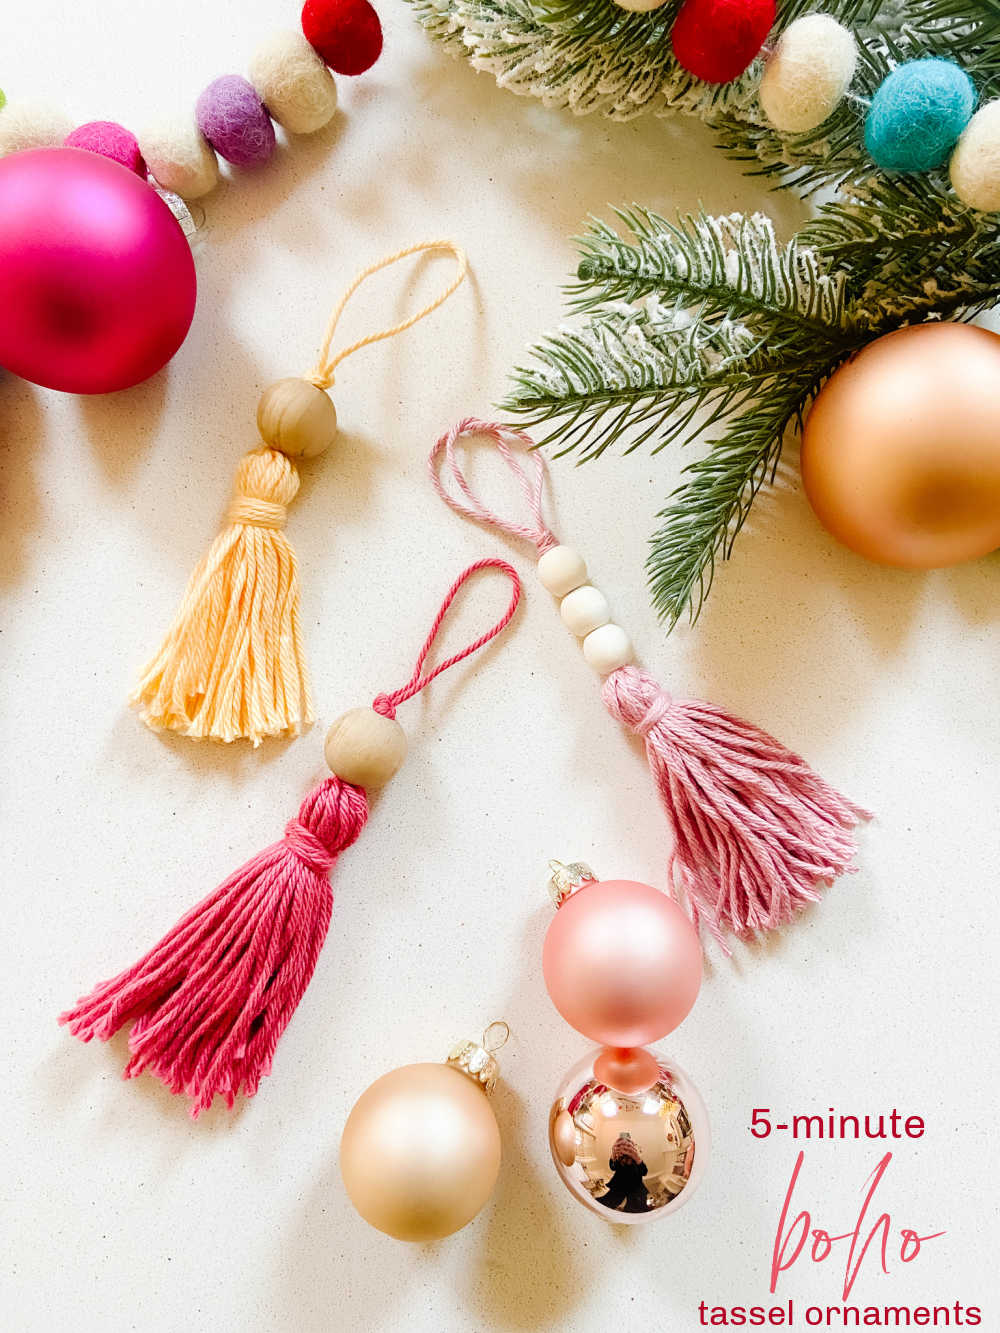 5-Minute Boho Tassel Ornaments -- inexpensive and easy to make!